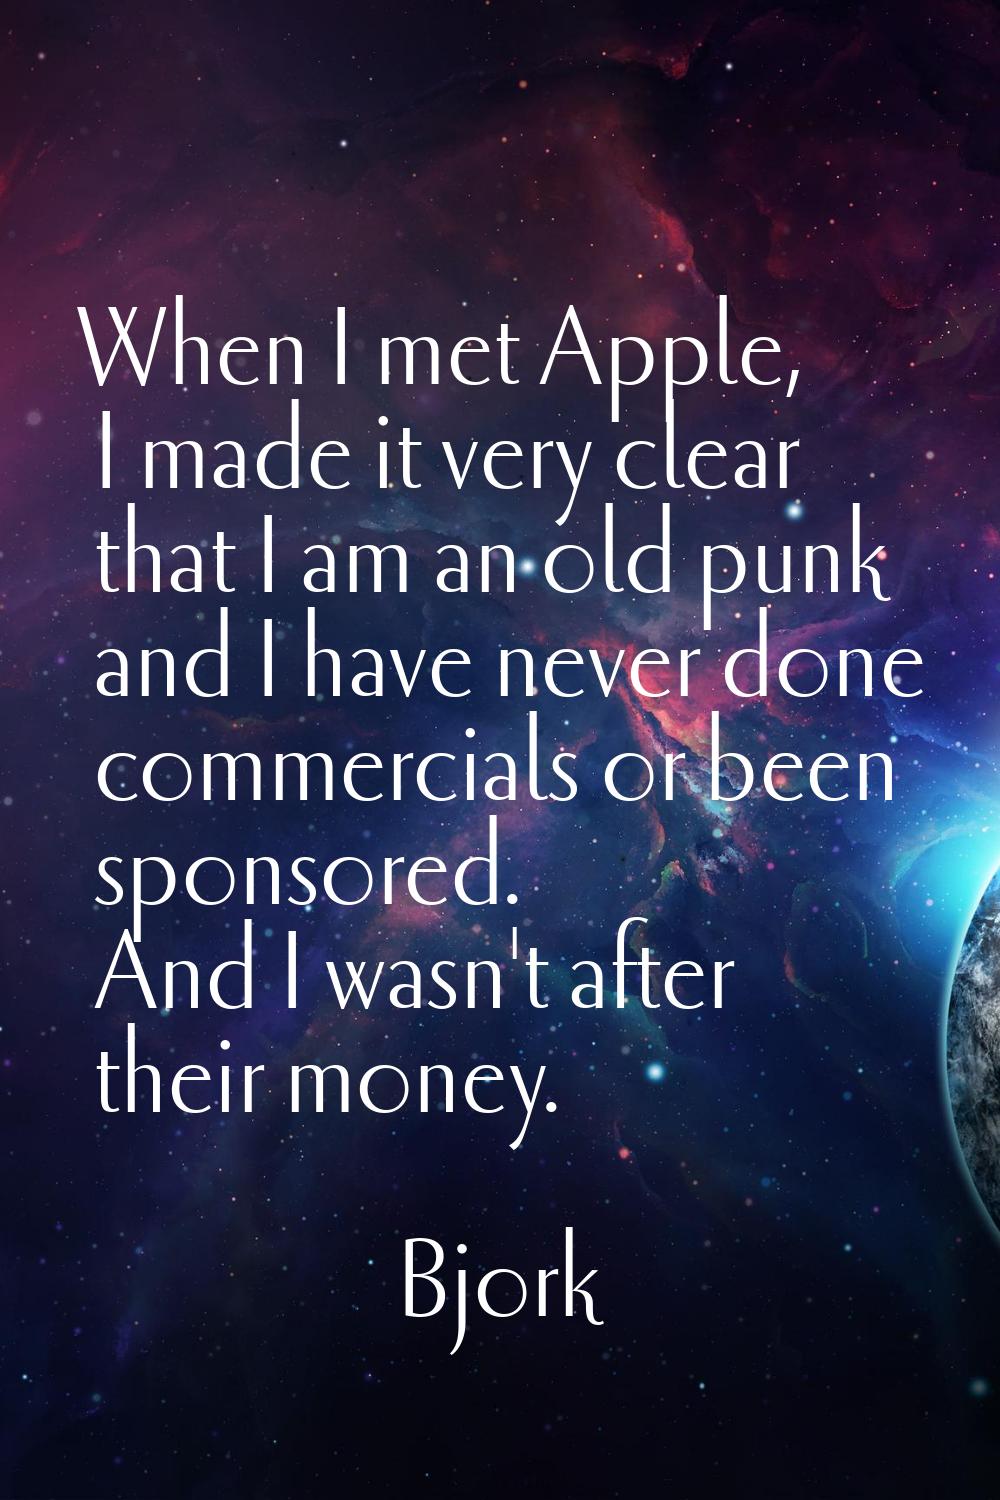 When I met Apple, I made it very clear that I am an old punk and I have never done commercials or b